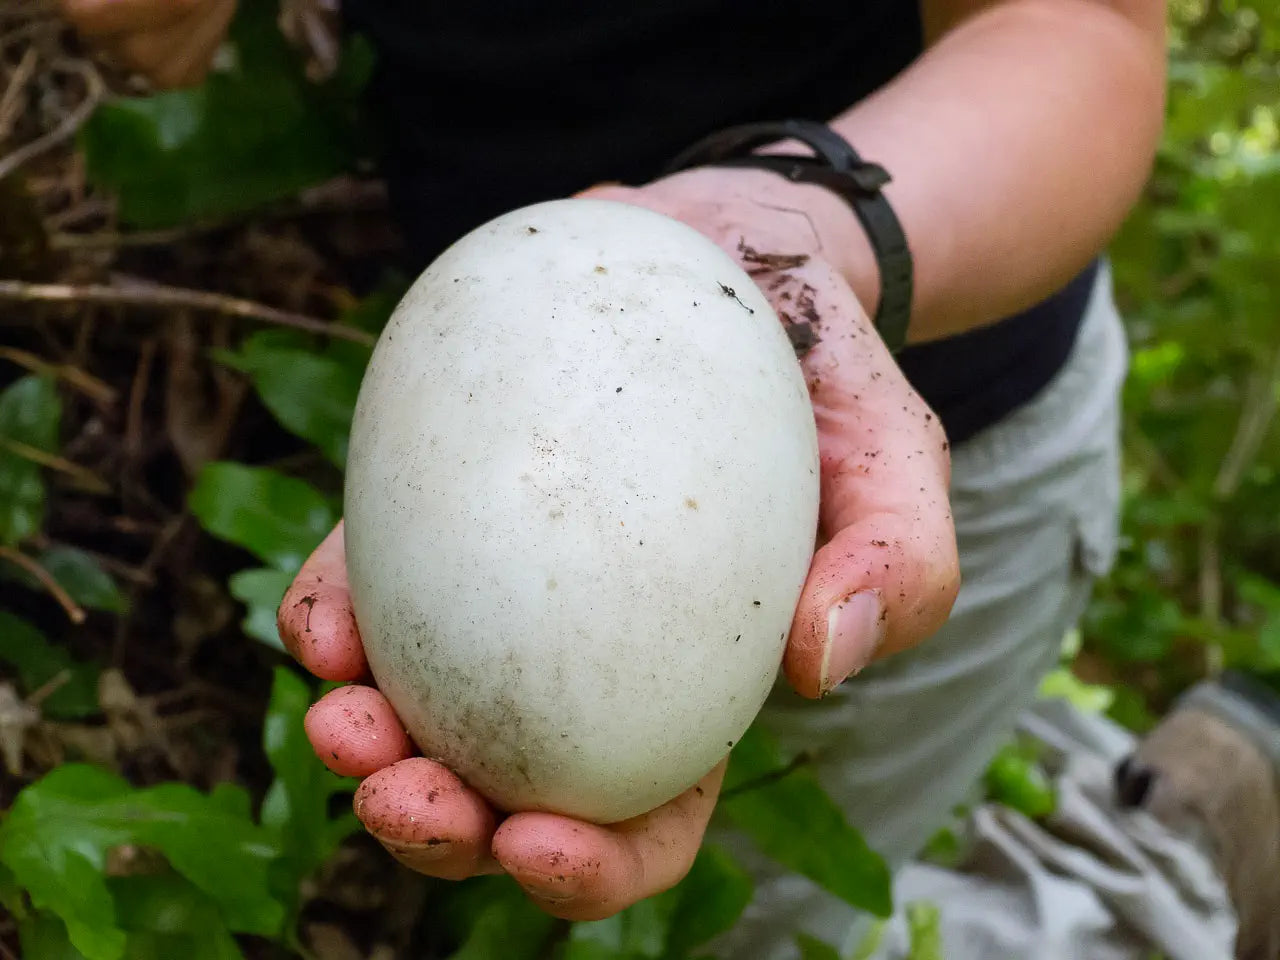 A researcher holds a kiwi eggs - it fills her entire hand